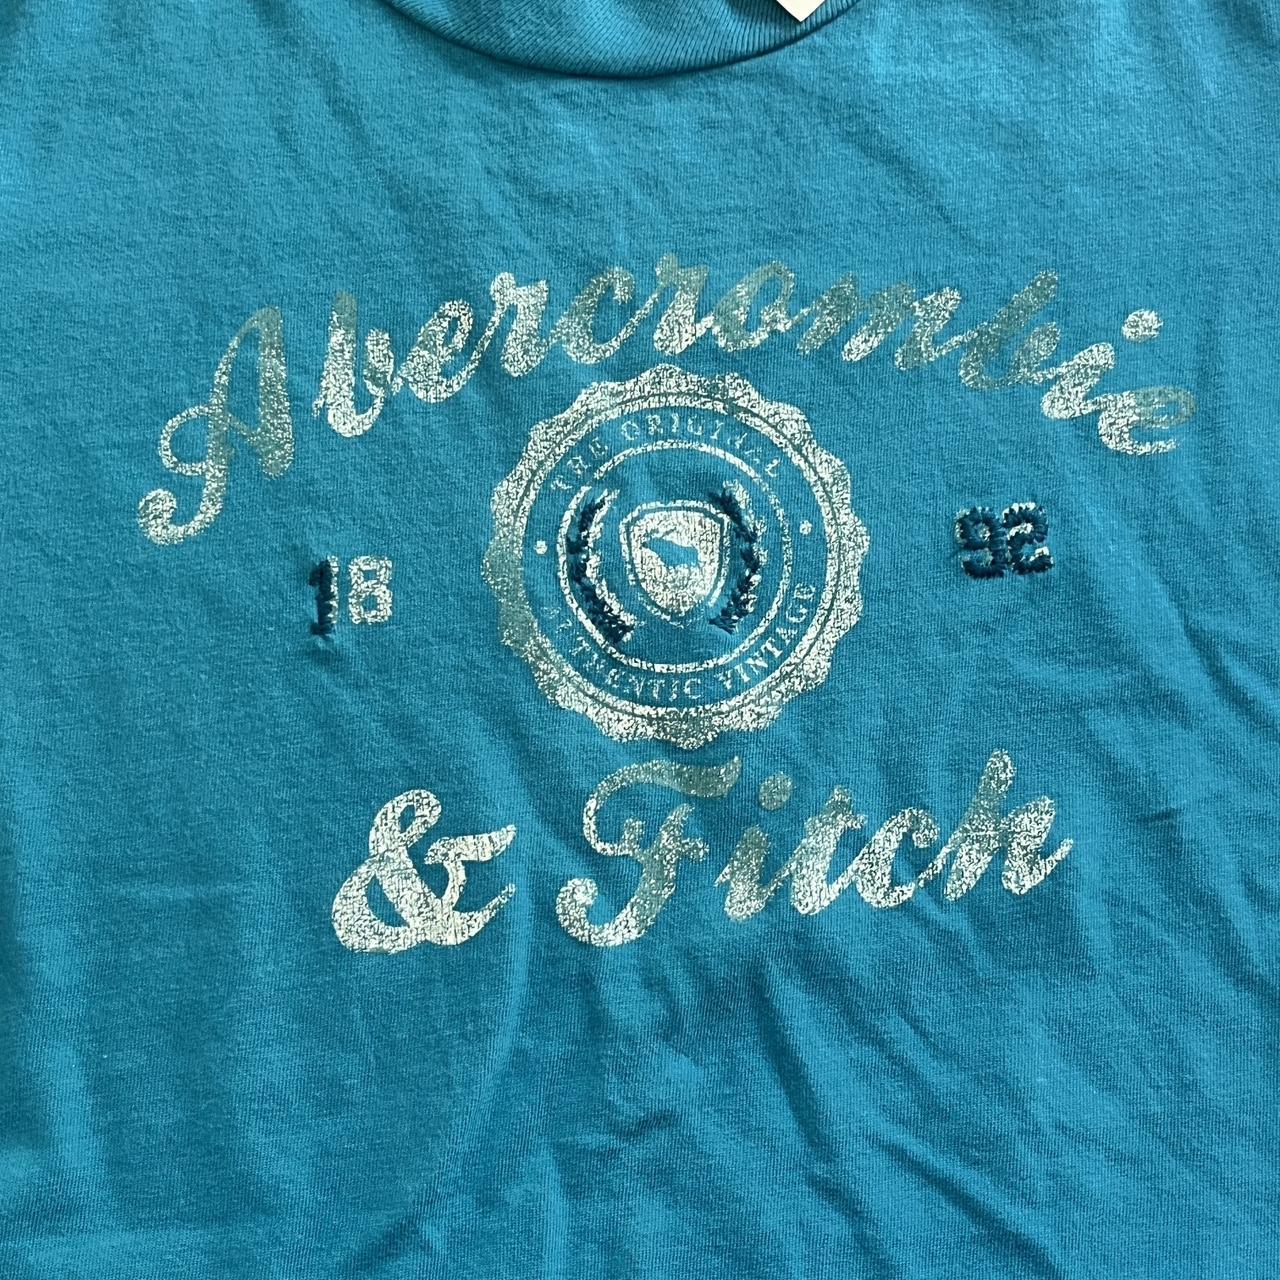 Abercrombie & Fitch Women's Blue and White T-shirt | Depop